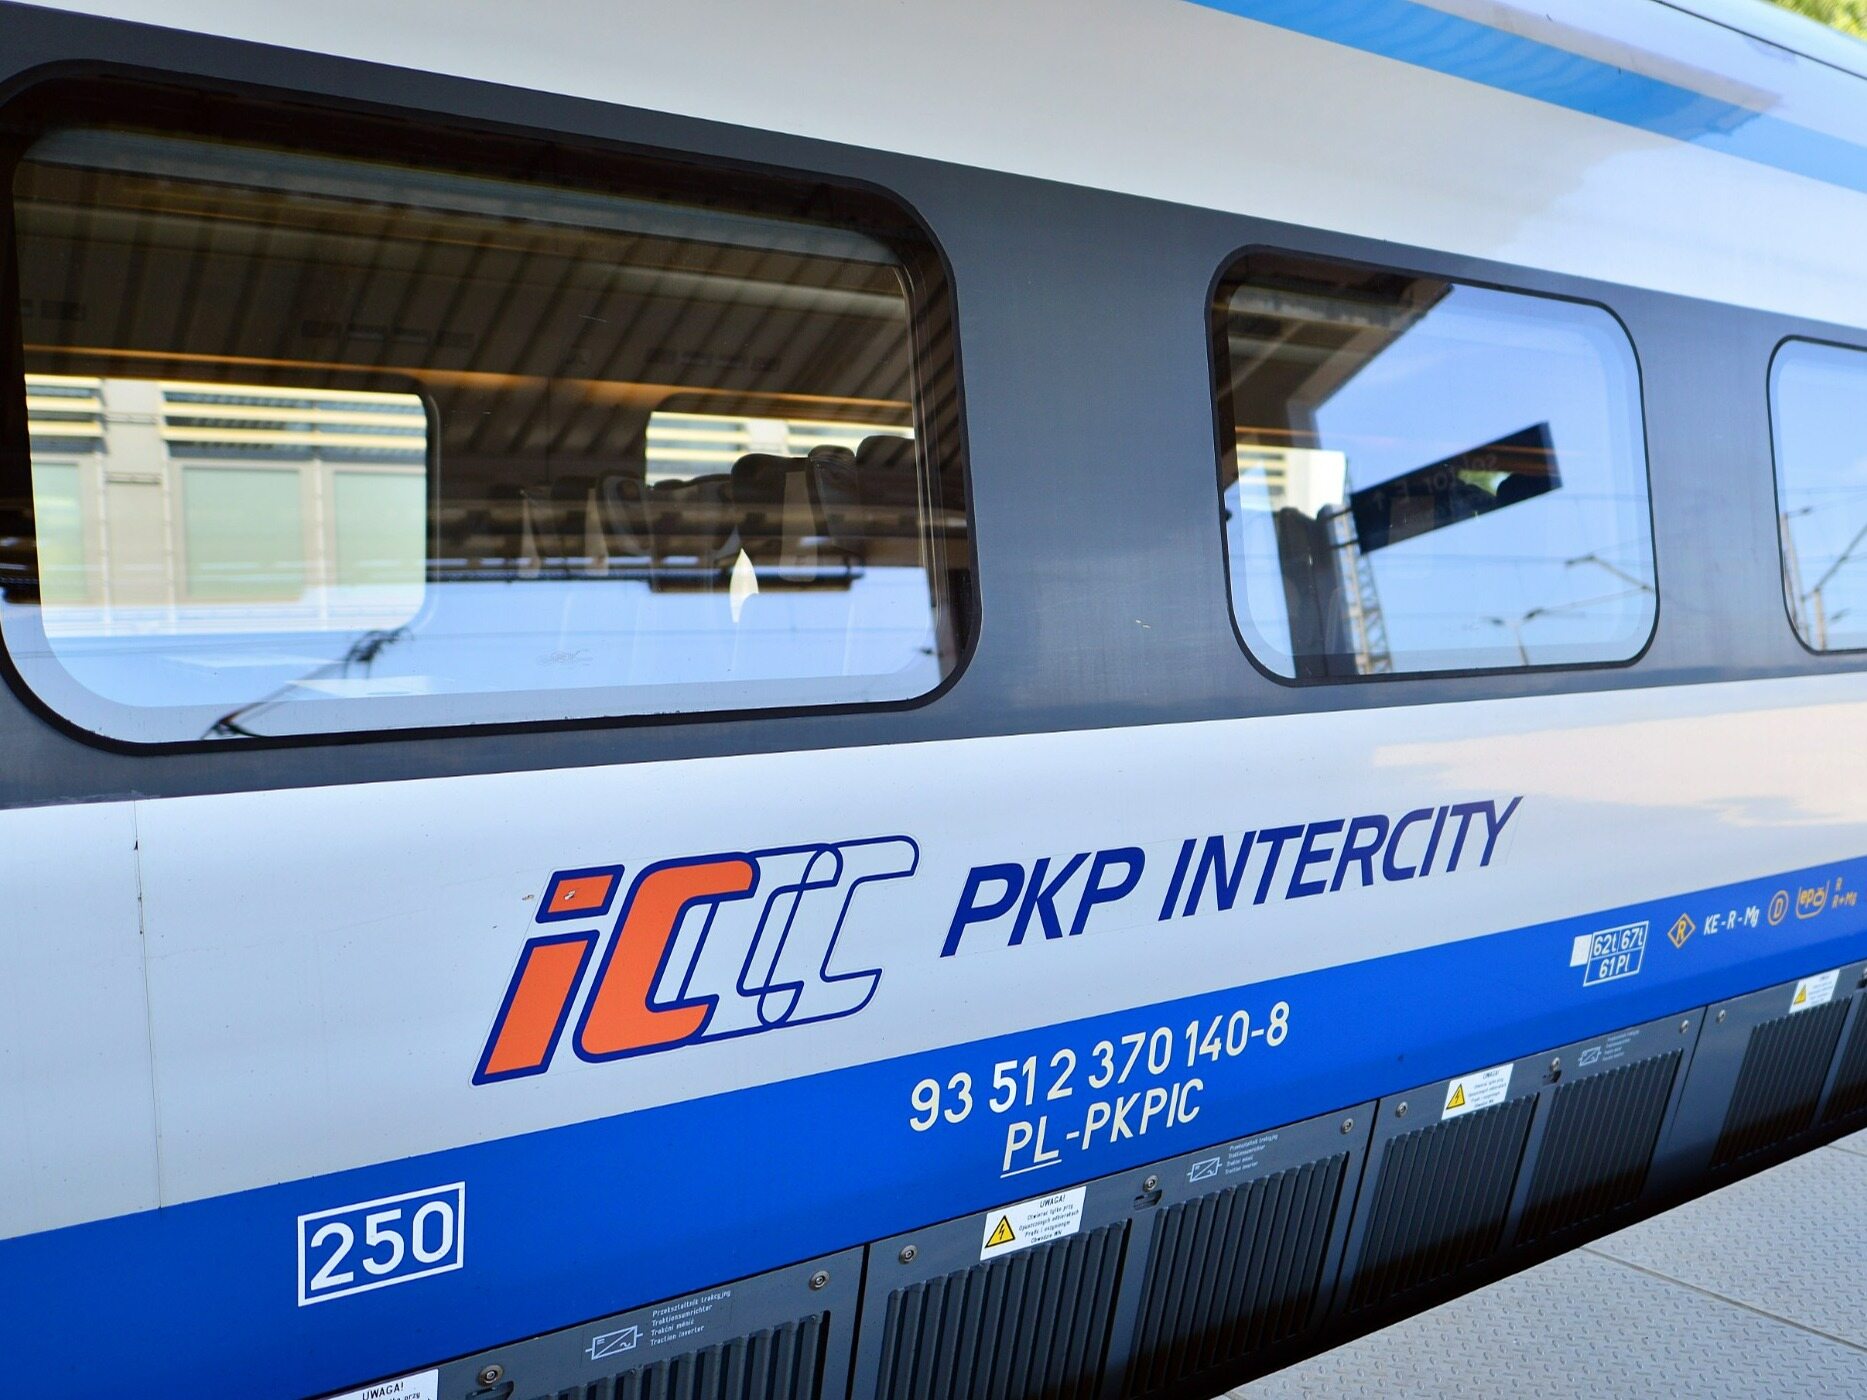 The PKP Intercity journey from Poland to Berlin is full of difficulties.  There are strikes on the railways